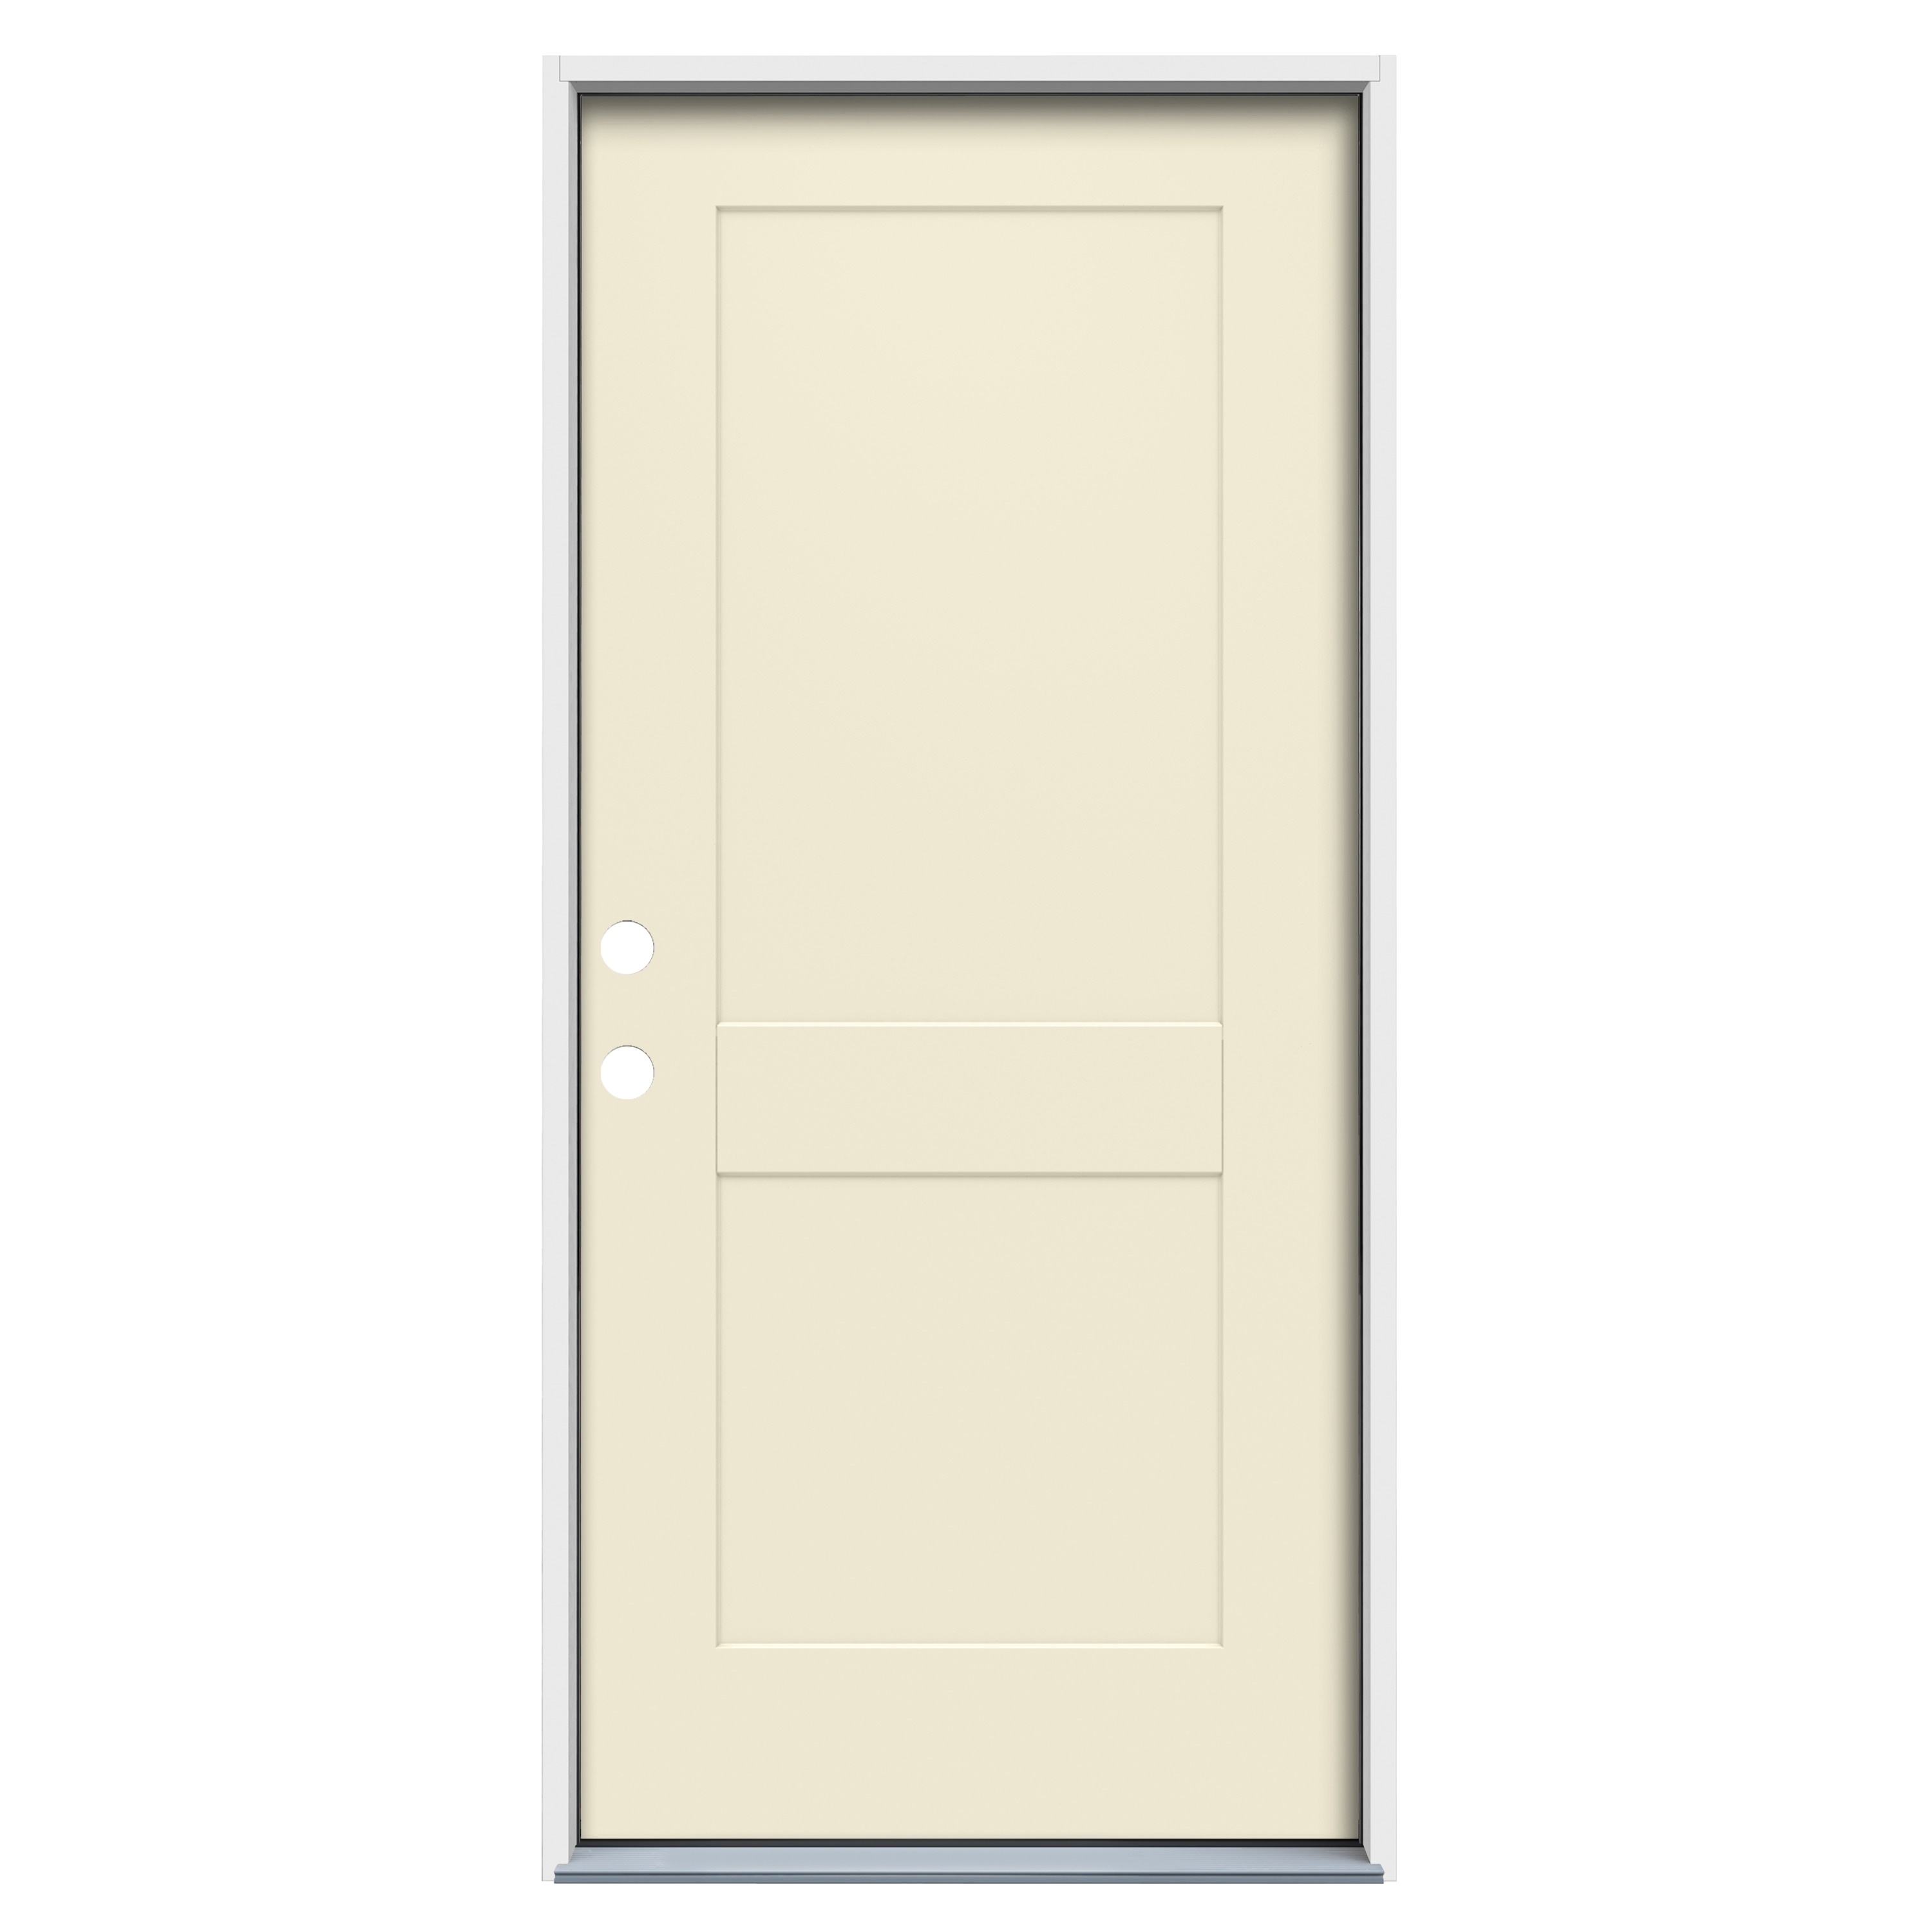 American Building Supply 32-in x 80-in Steel Right-Hand Inswing Bisque Paint Painted Prehung Single Front Door Insulating Core in Off-White -  LO1049624